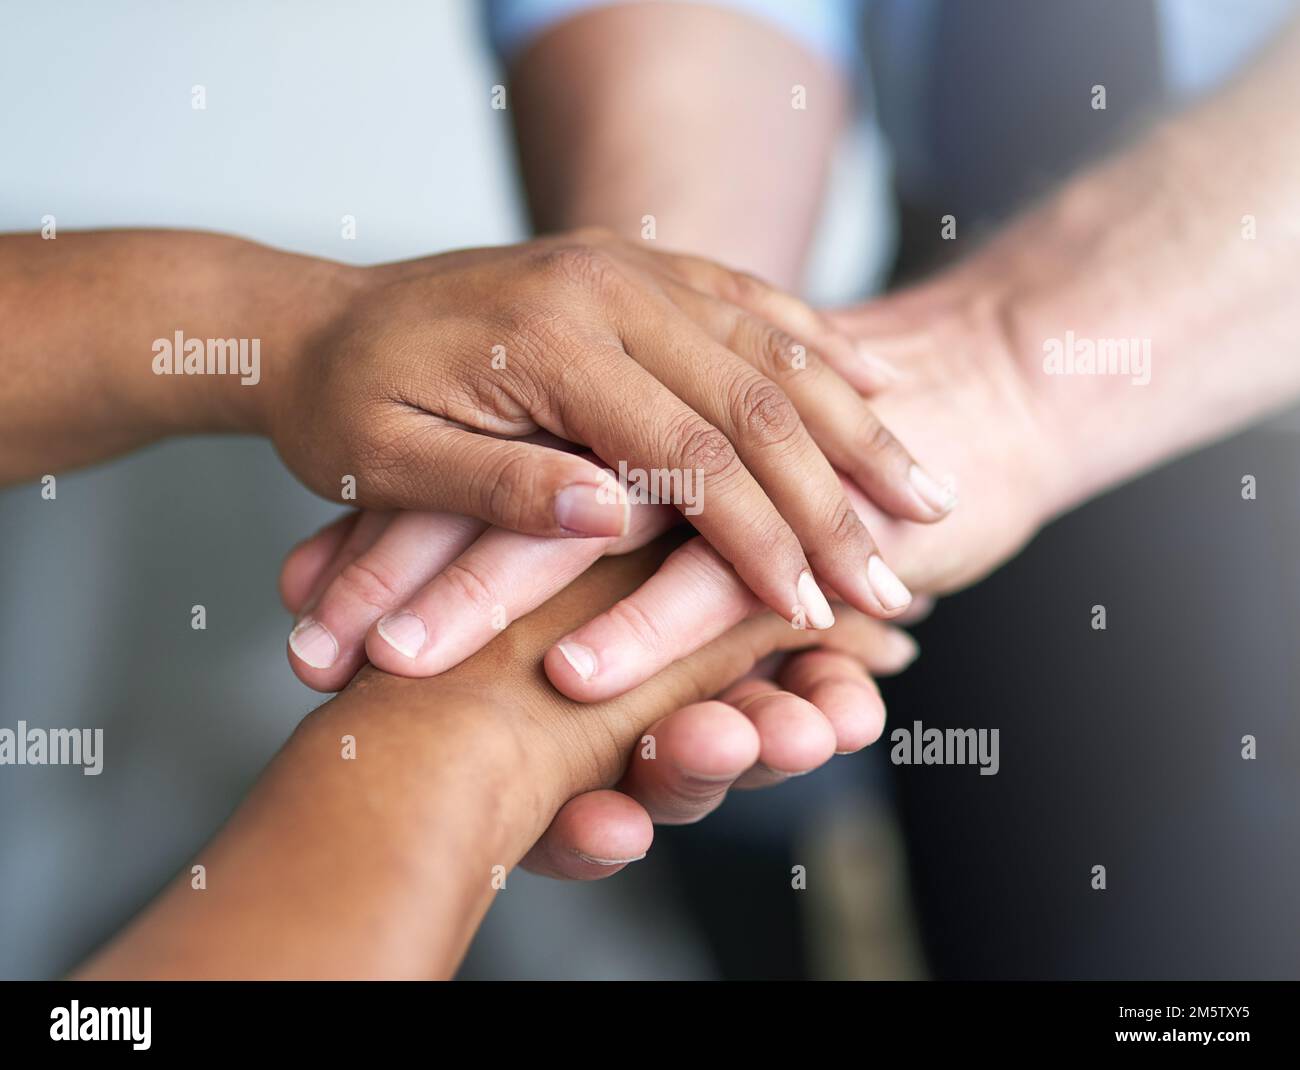 Its all about teamwork. two peoples hands together in unity. Stock Photo